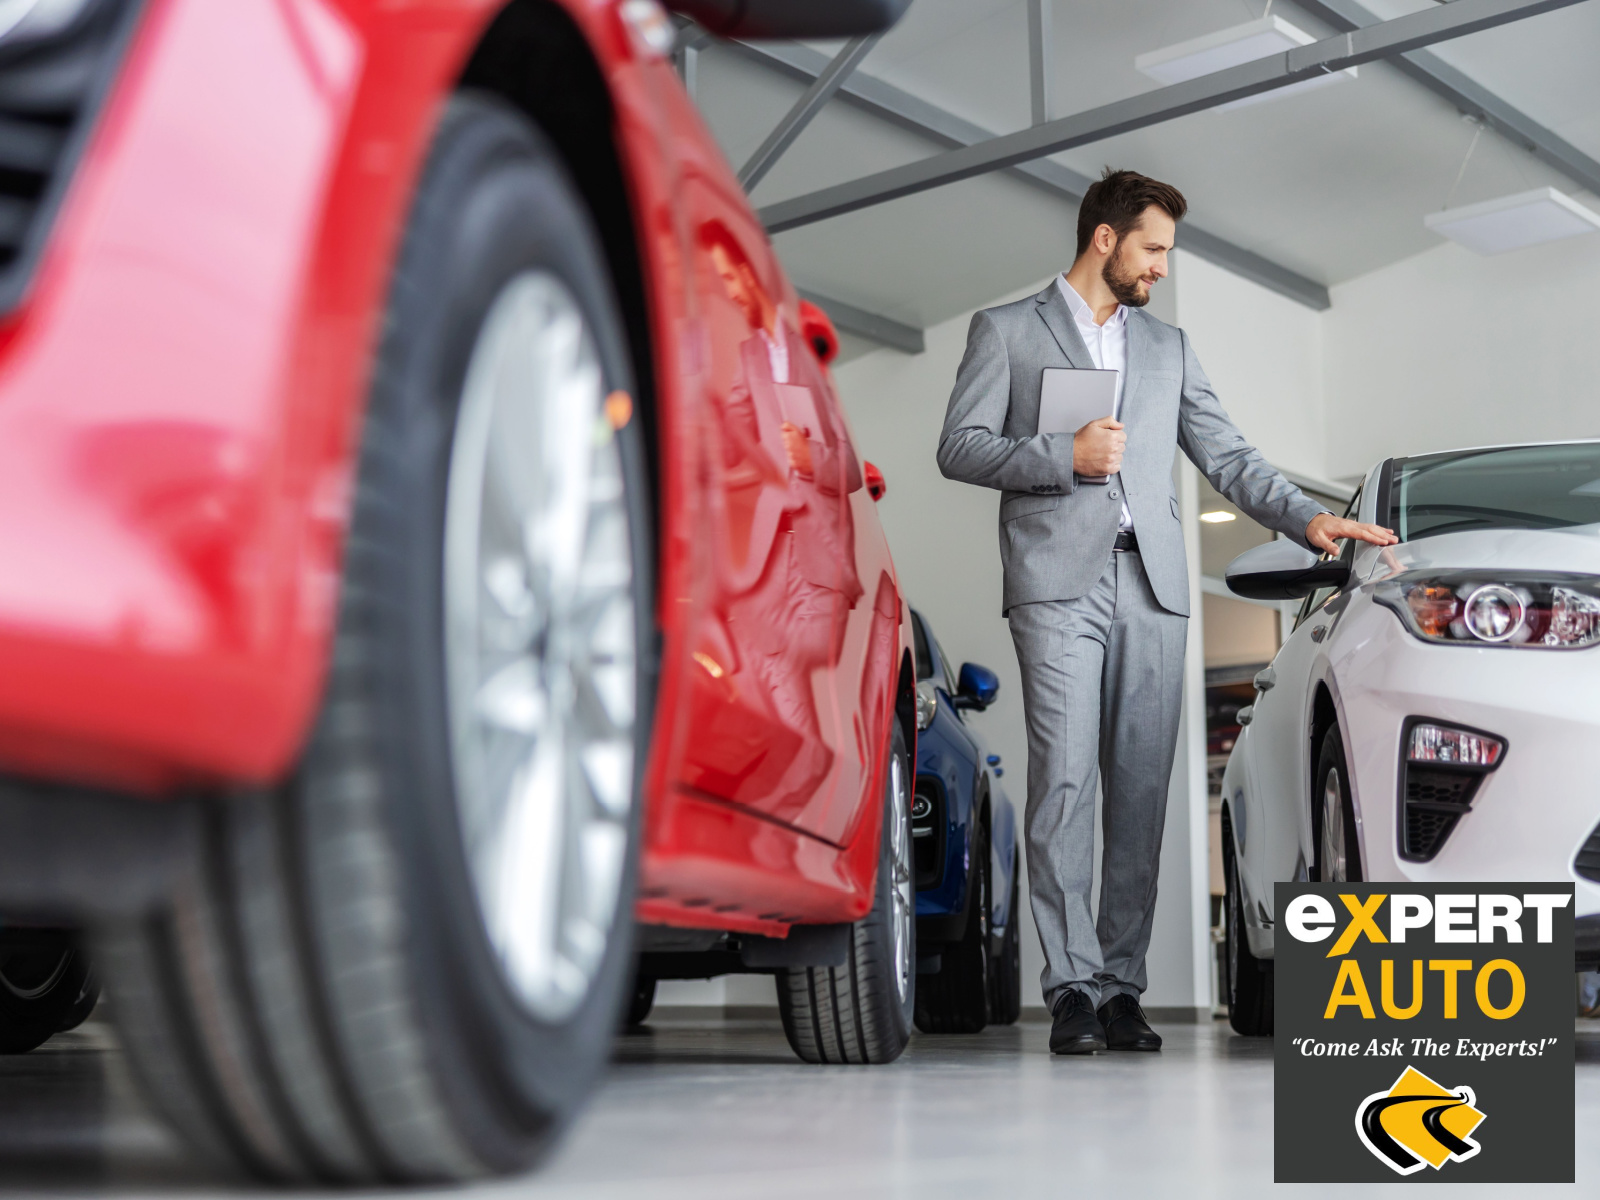 Expert Auto: Your Destination for Used Car Loans for Bad Credit